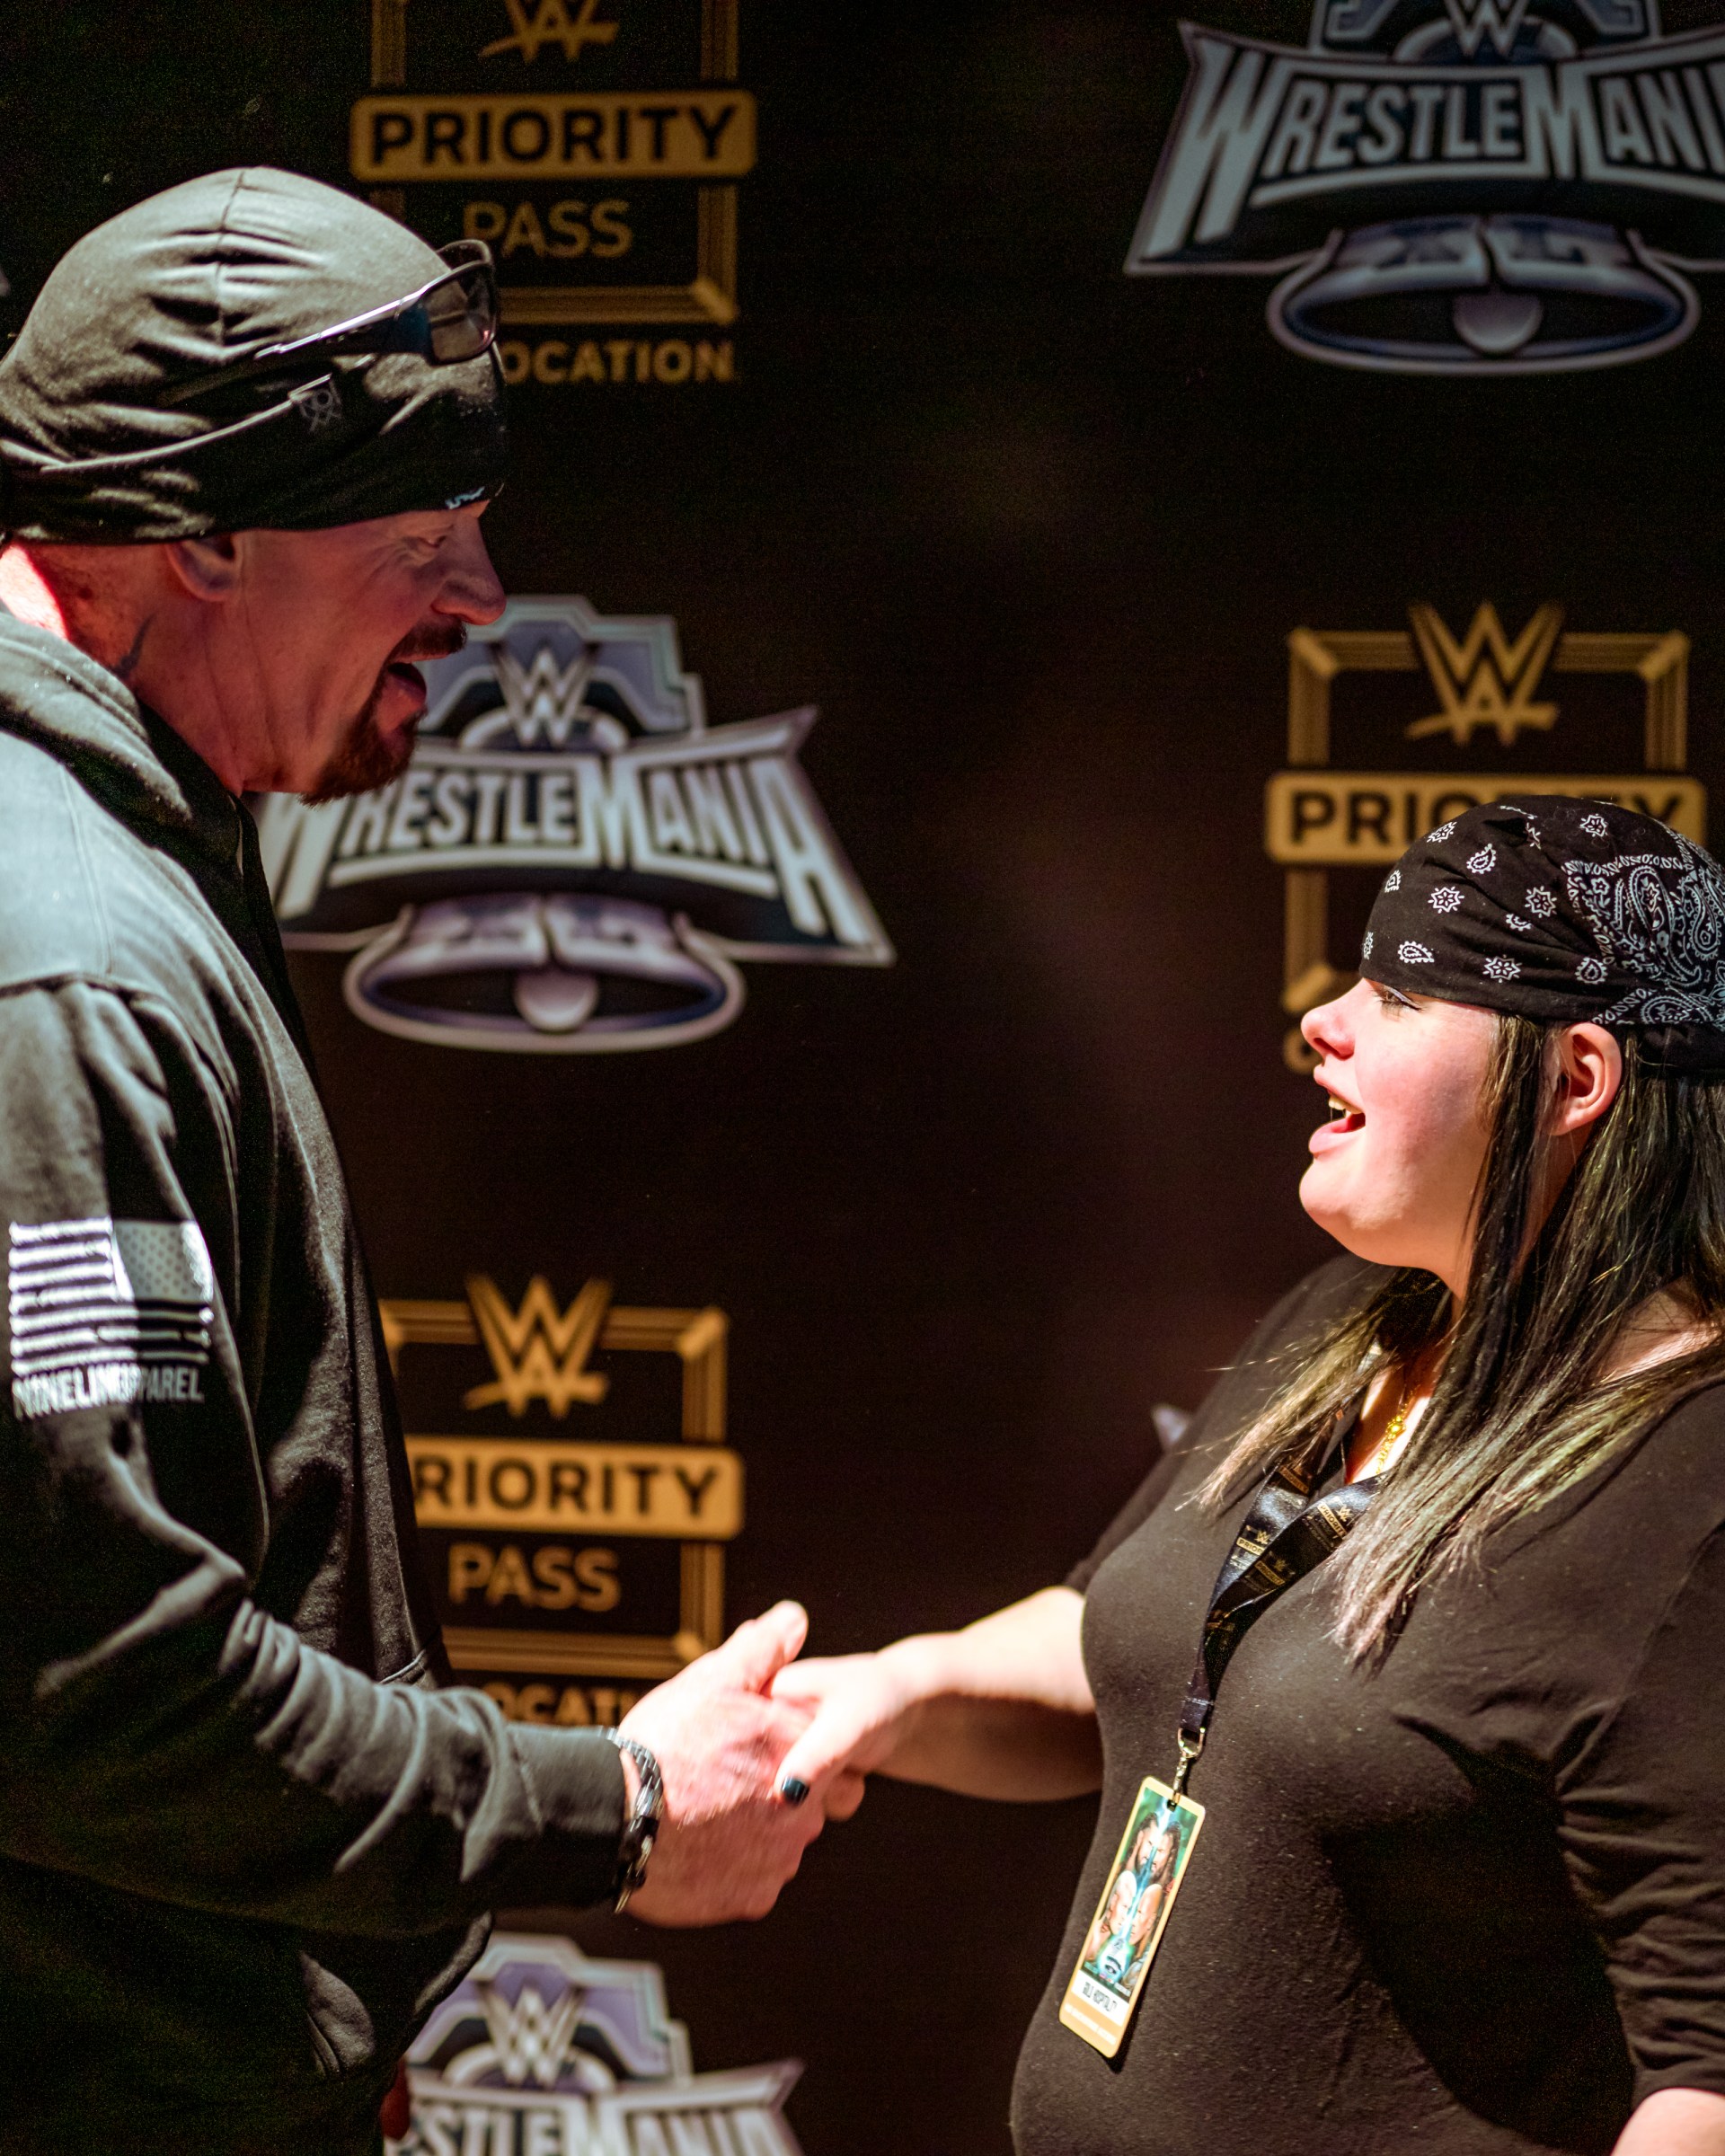 bodyslams and pre drinks with the undertaker: behind the scenes at wwe wrestlemania